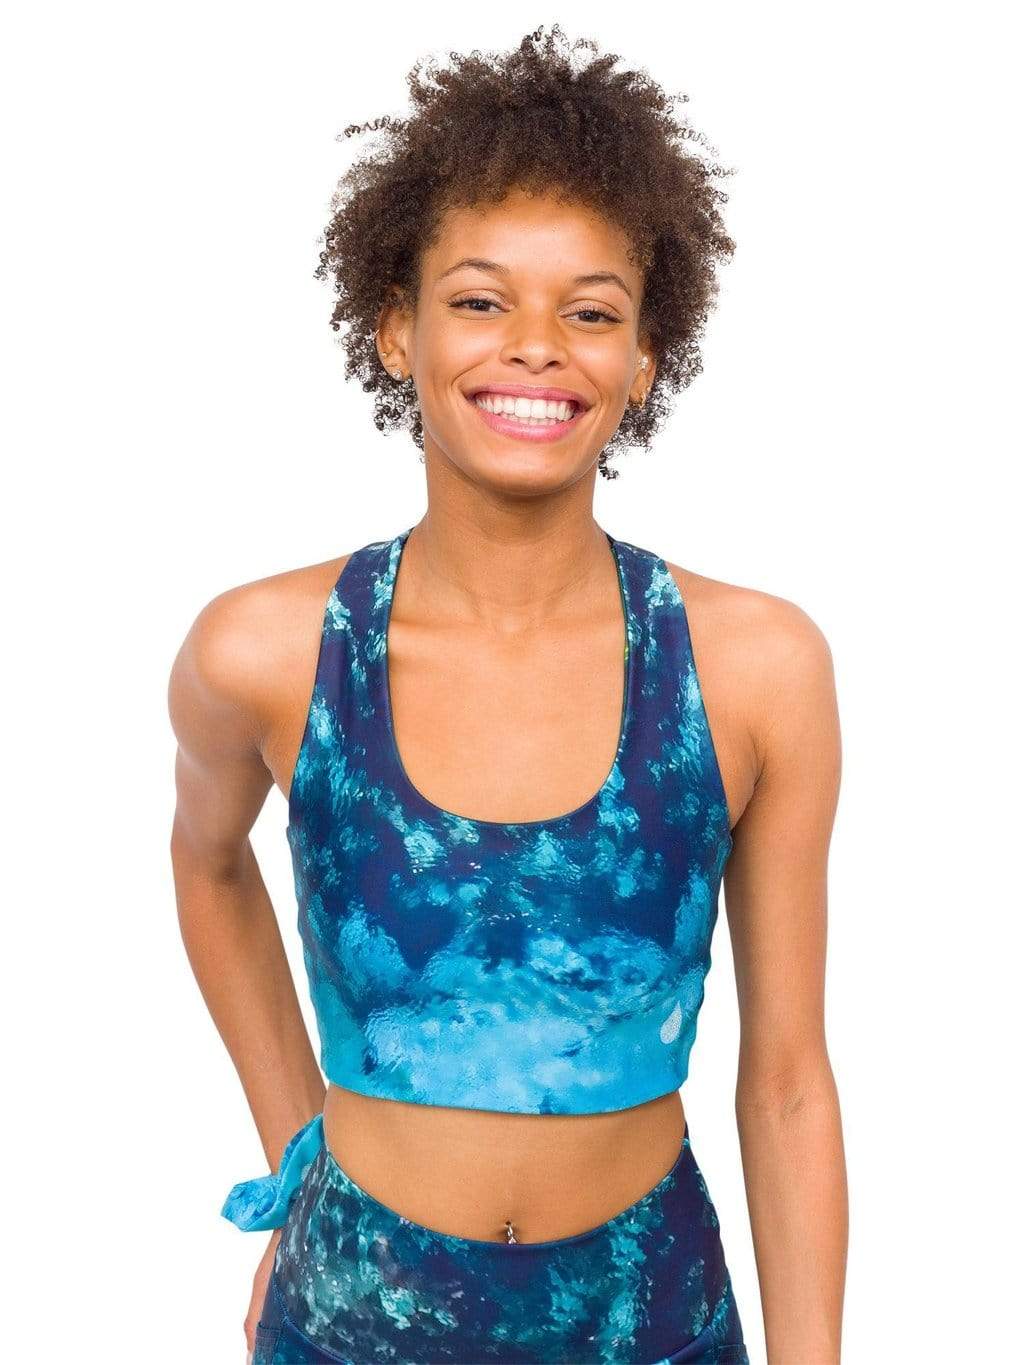 Fountain of Youth/Mermaid Camo Reversible Top - Waterlust